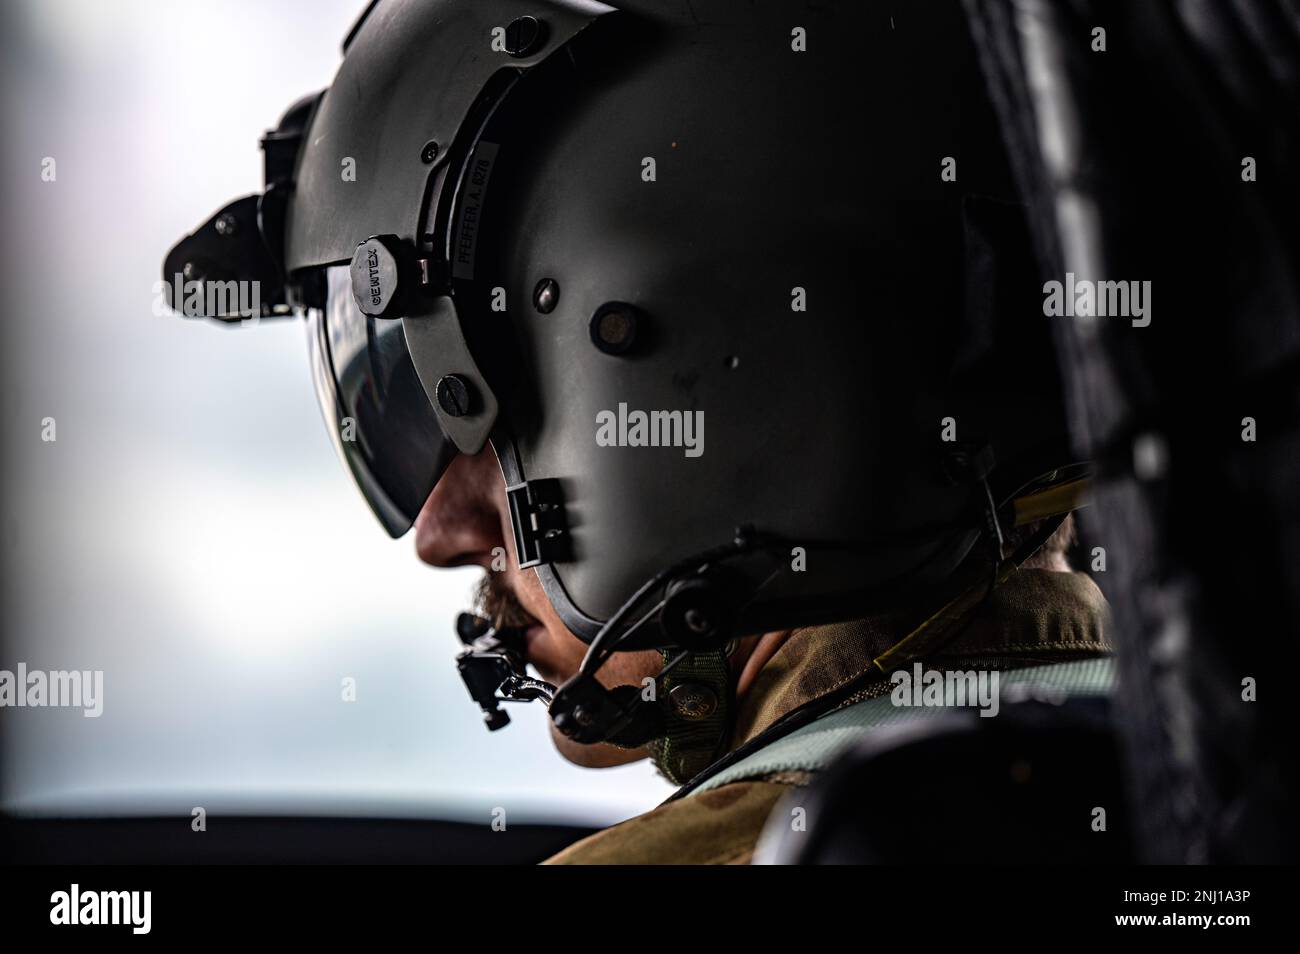 U.S. Army Capt. Andrew Pfeiffer, commander of Bravo Company, 1st Squadron, 214th General Support Aviation Battalion, 12th Combat Aviation Brigade, flies a Ch-47 Chinook helicopter during low level flight training at Tampere, Finland, Aug. 4, 2022. . 12th Combat Aviation Brigade is one of the units to support U.S. European Command theater strategy by demonstrating U.S. commitment to European Allies and Partners and highlighting U.S. capabilities to diverse audiences. 12 CAB is among other units assigned to V Corps, America's Forward Deployed Corps in Europe. They work alongside NATO Allies and Stock Photo